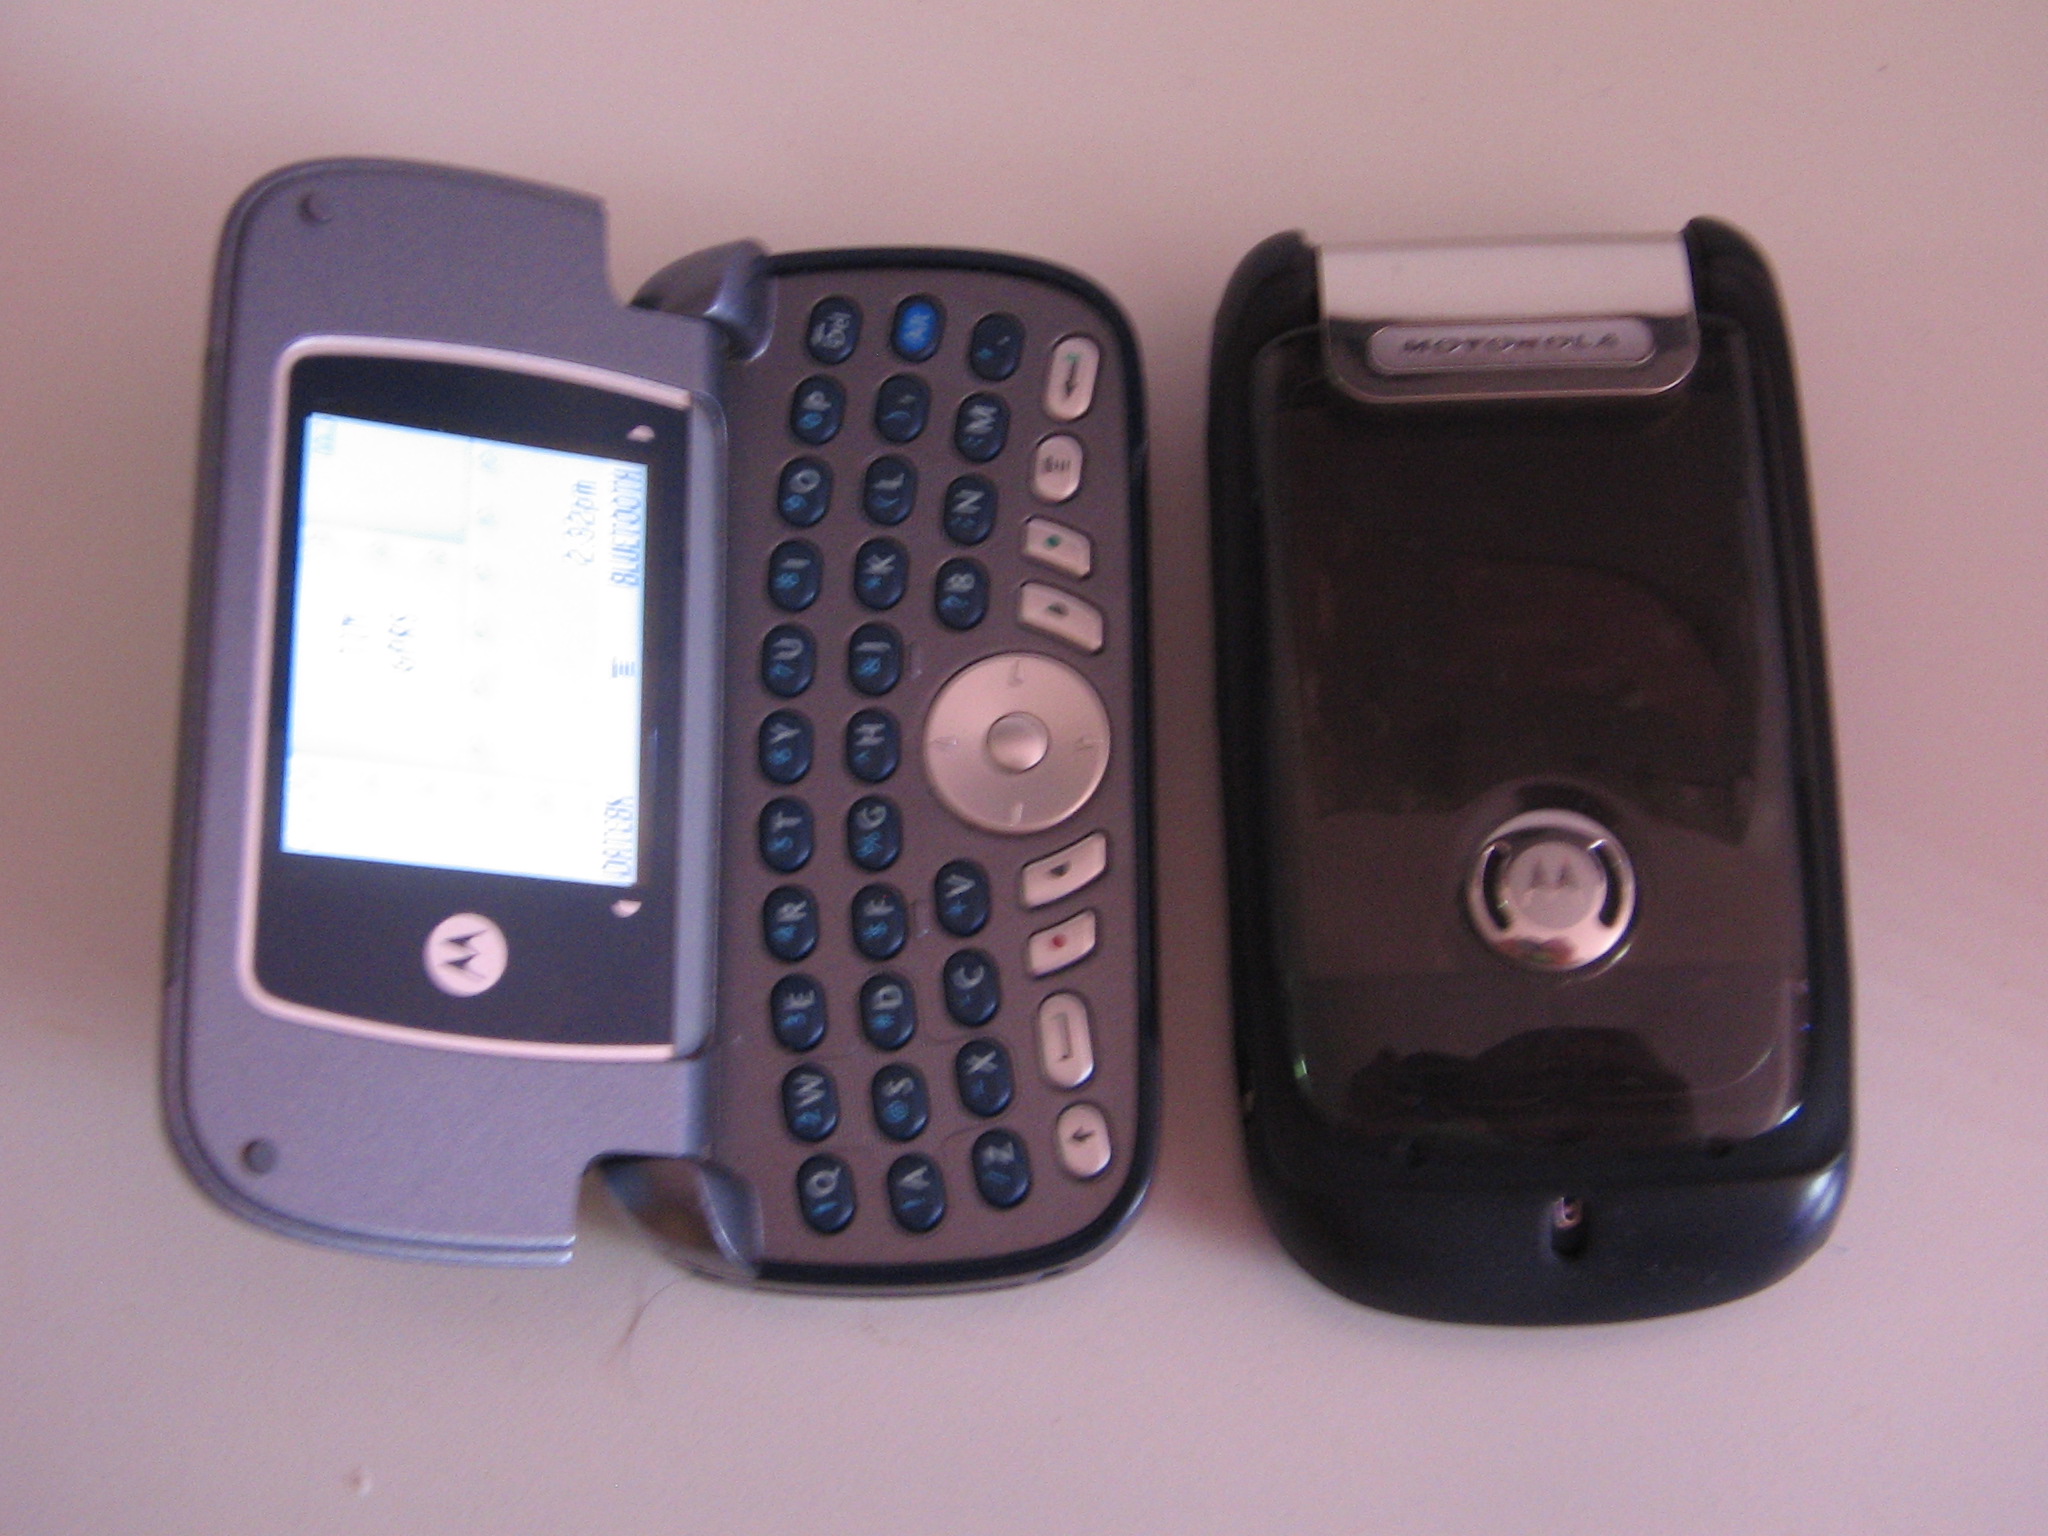 three cellphones are lined up on a table